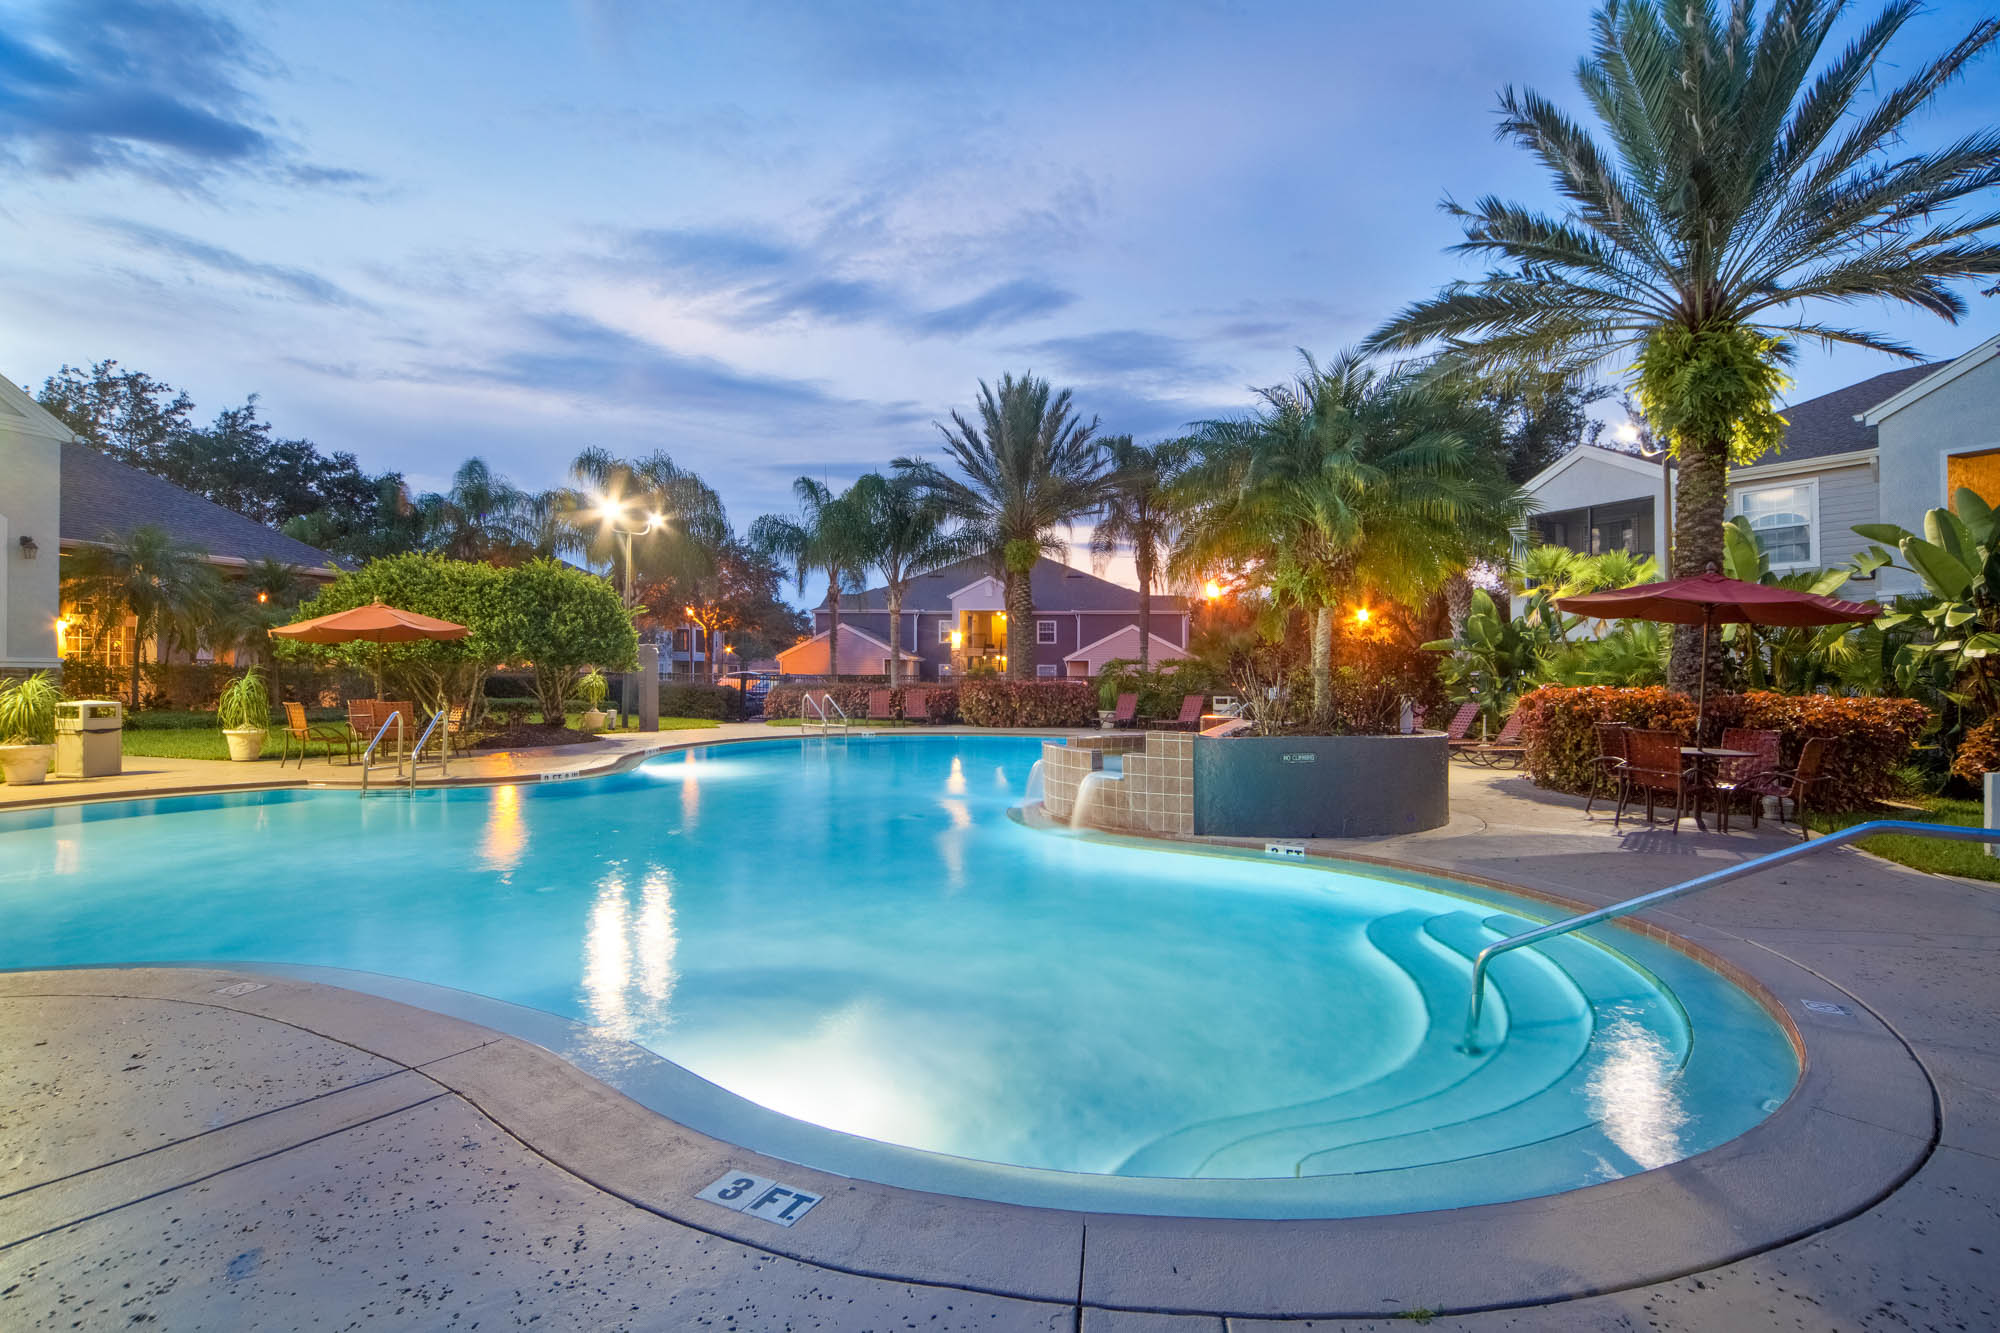 The pool at Osprey Links at Hunter's Creek in Orlando, Florida.